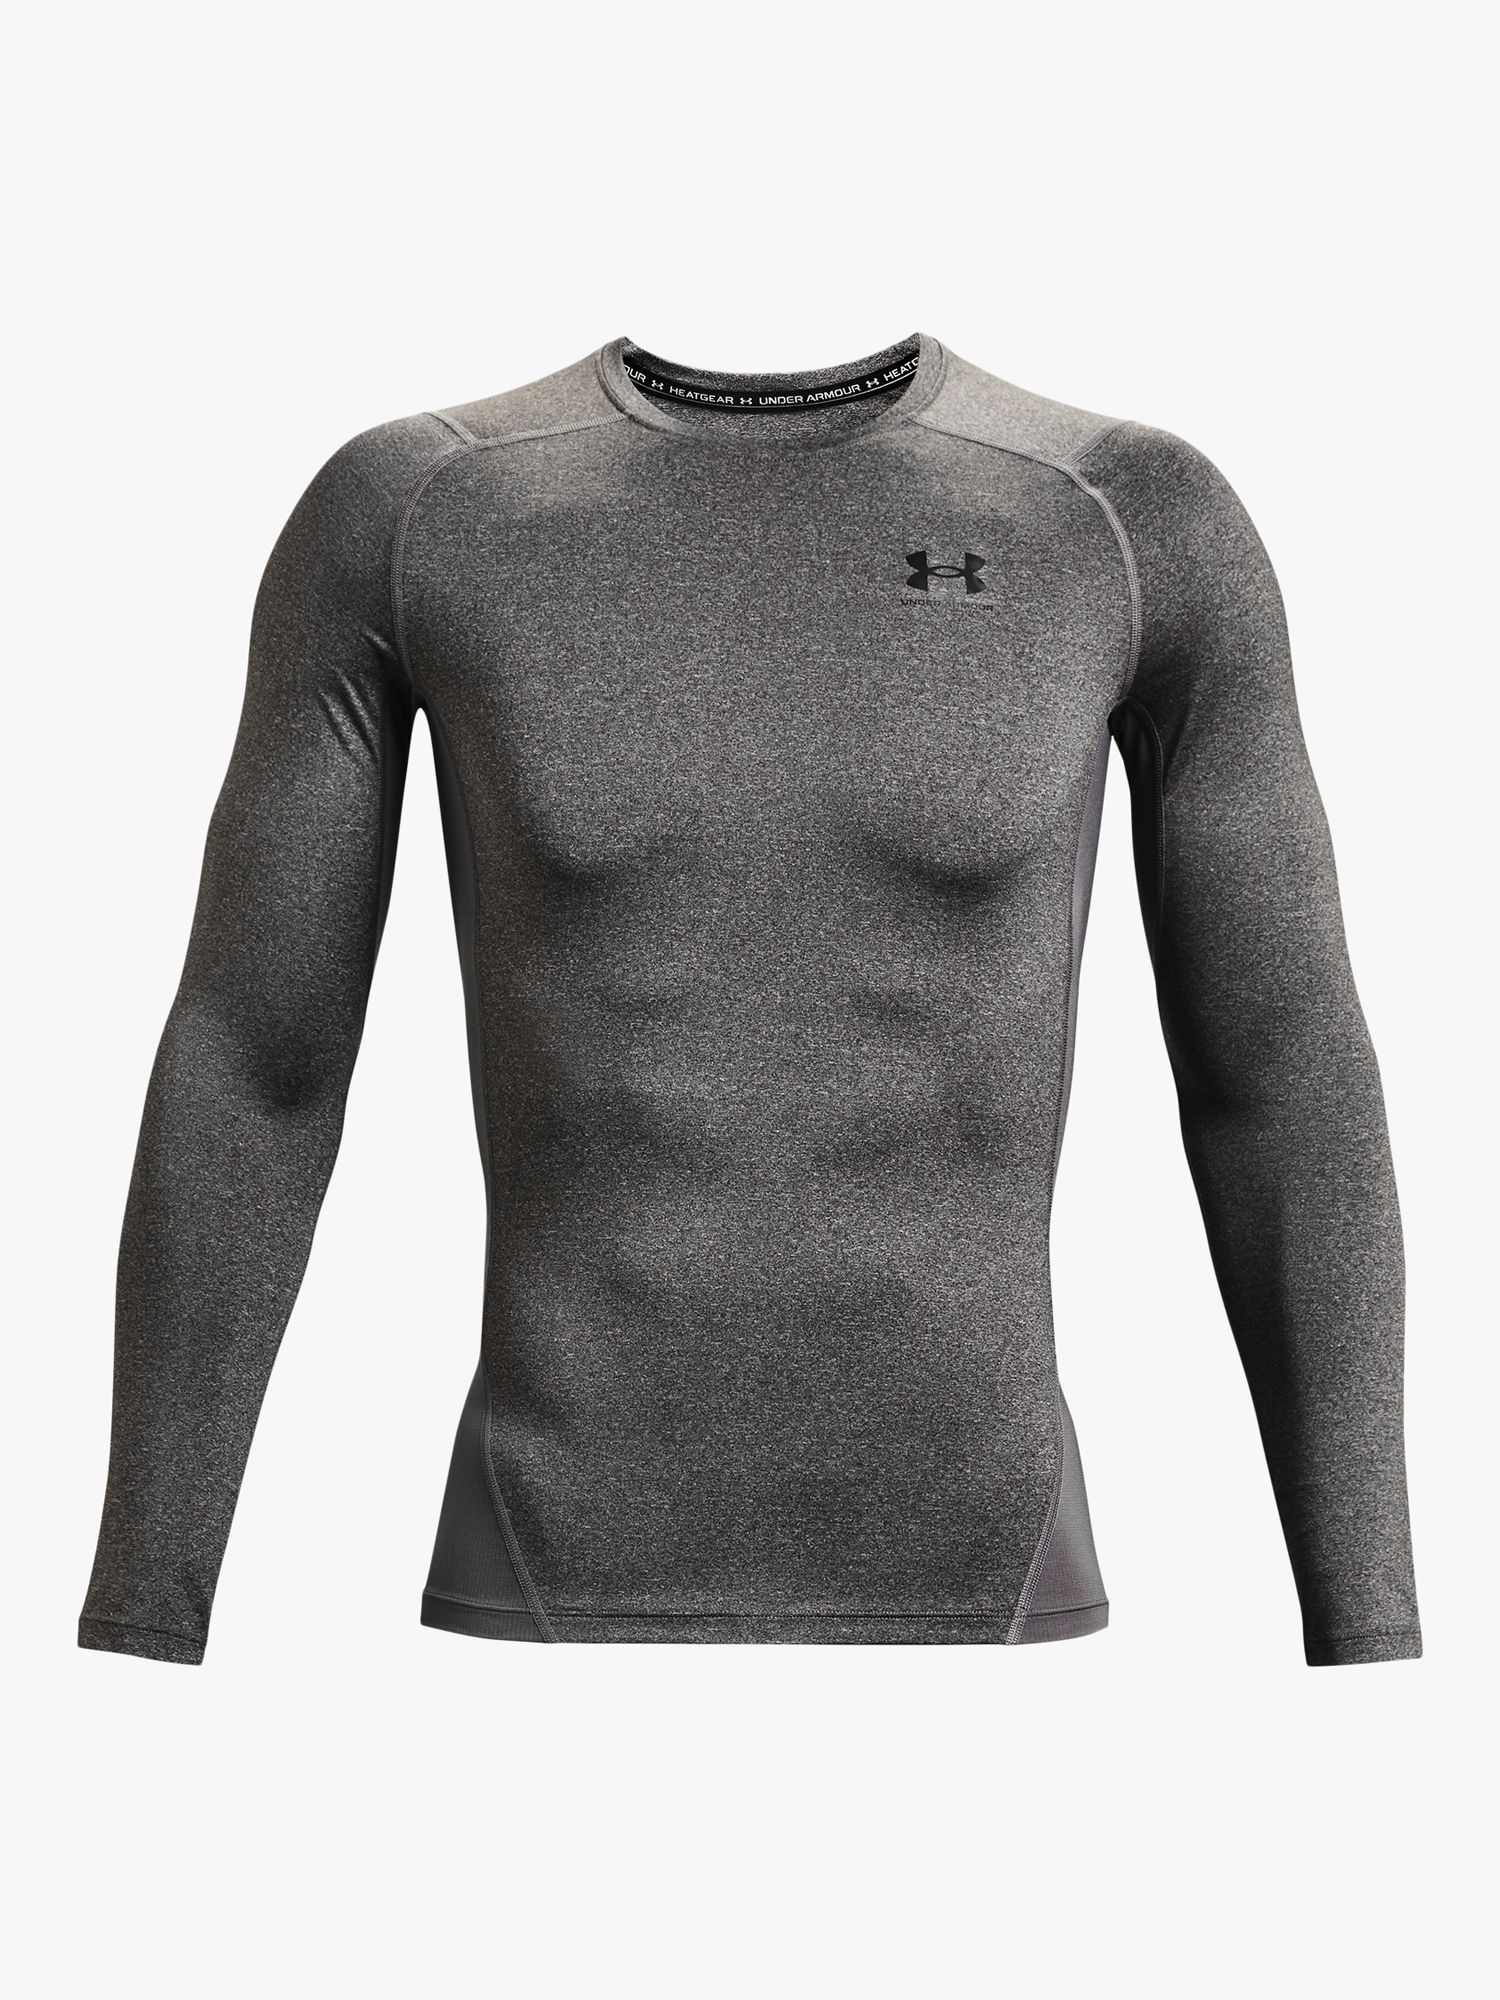 Under Armour Adults Heatgear Armour Compression Long Sleeve Top - Blue